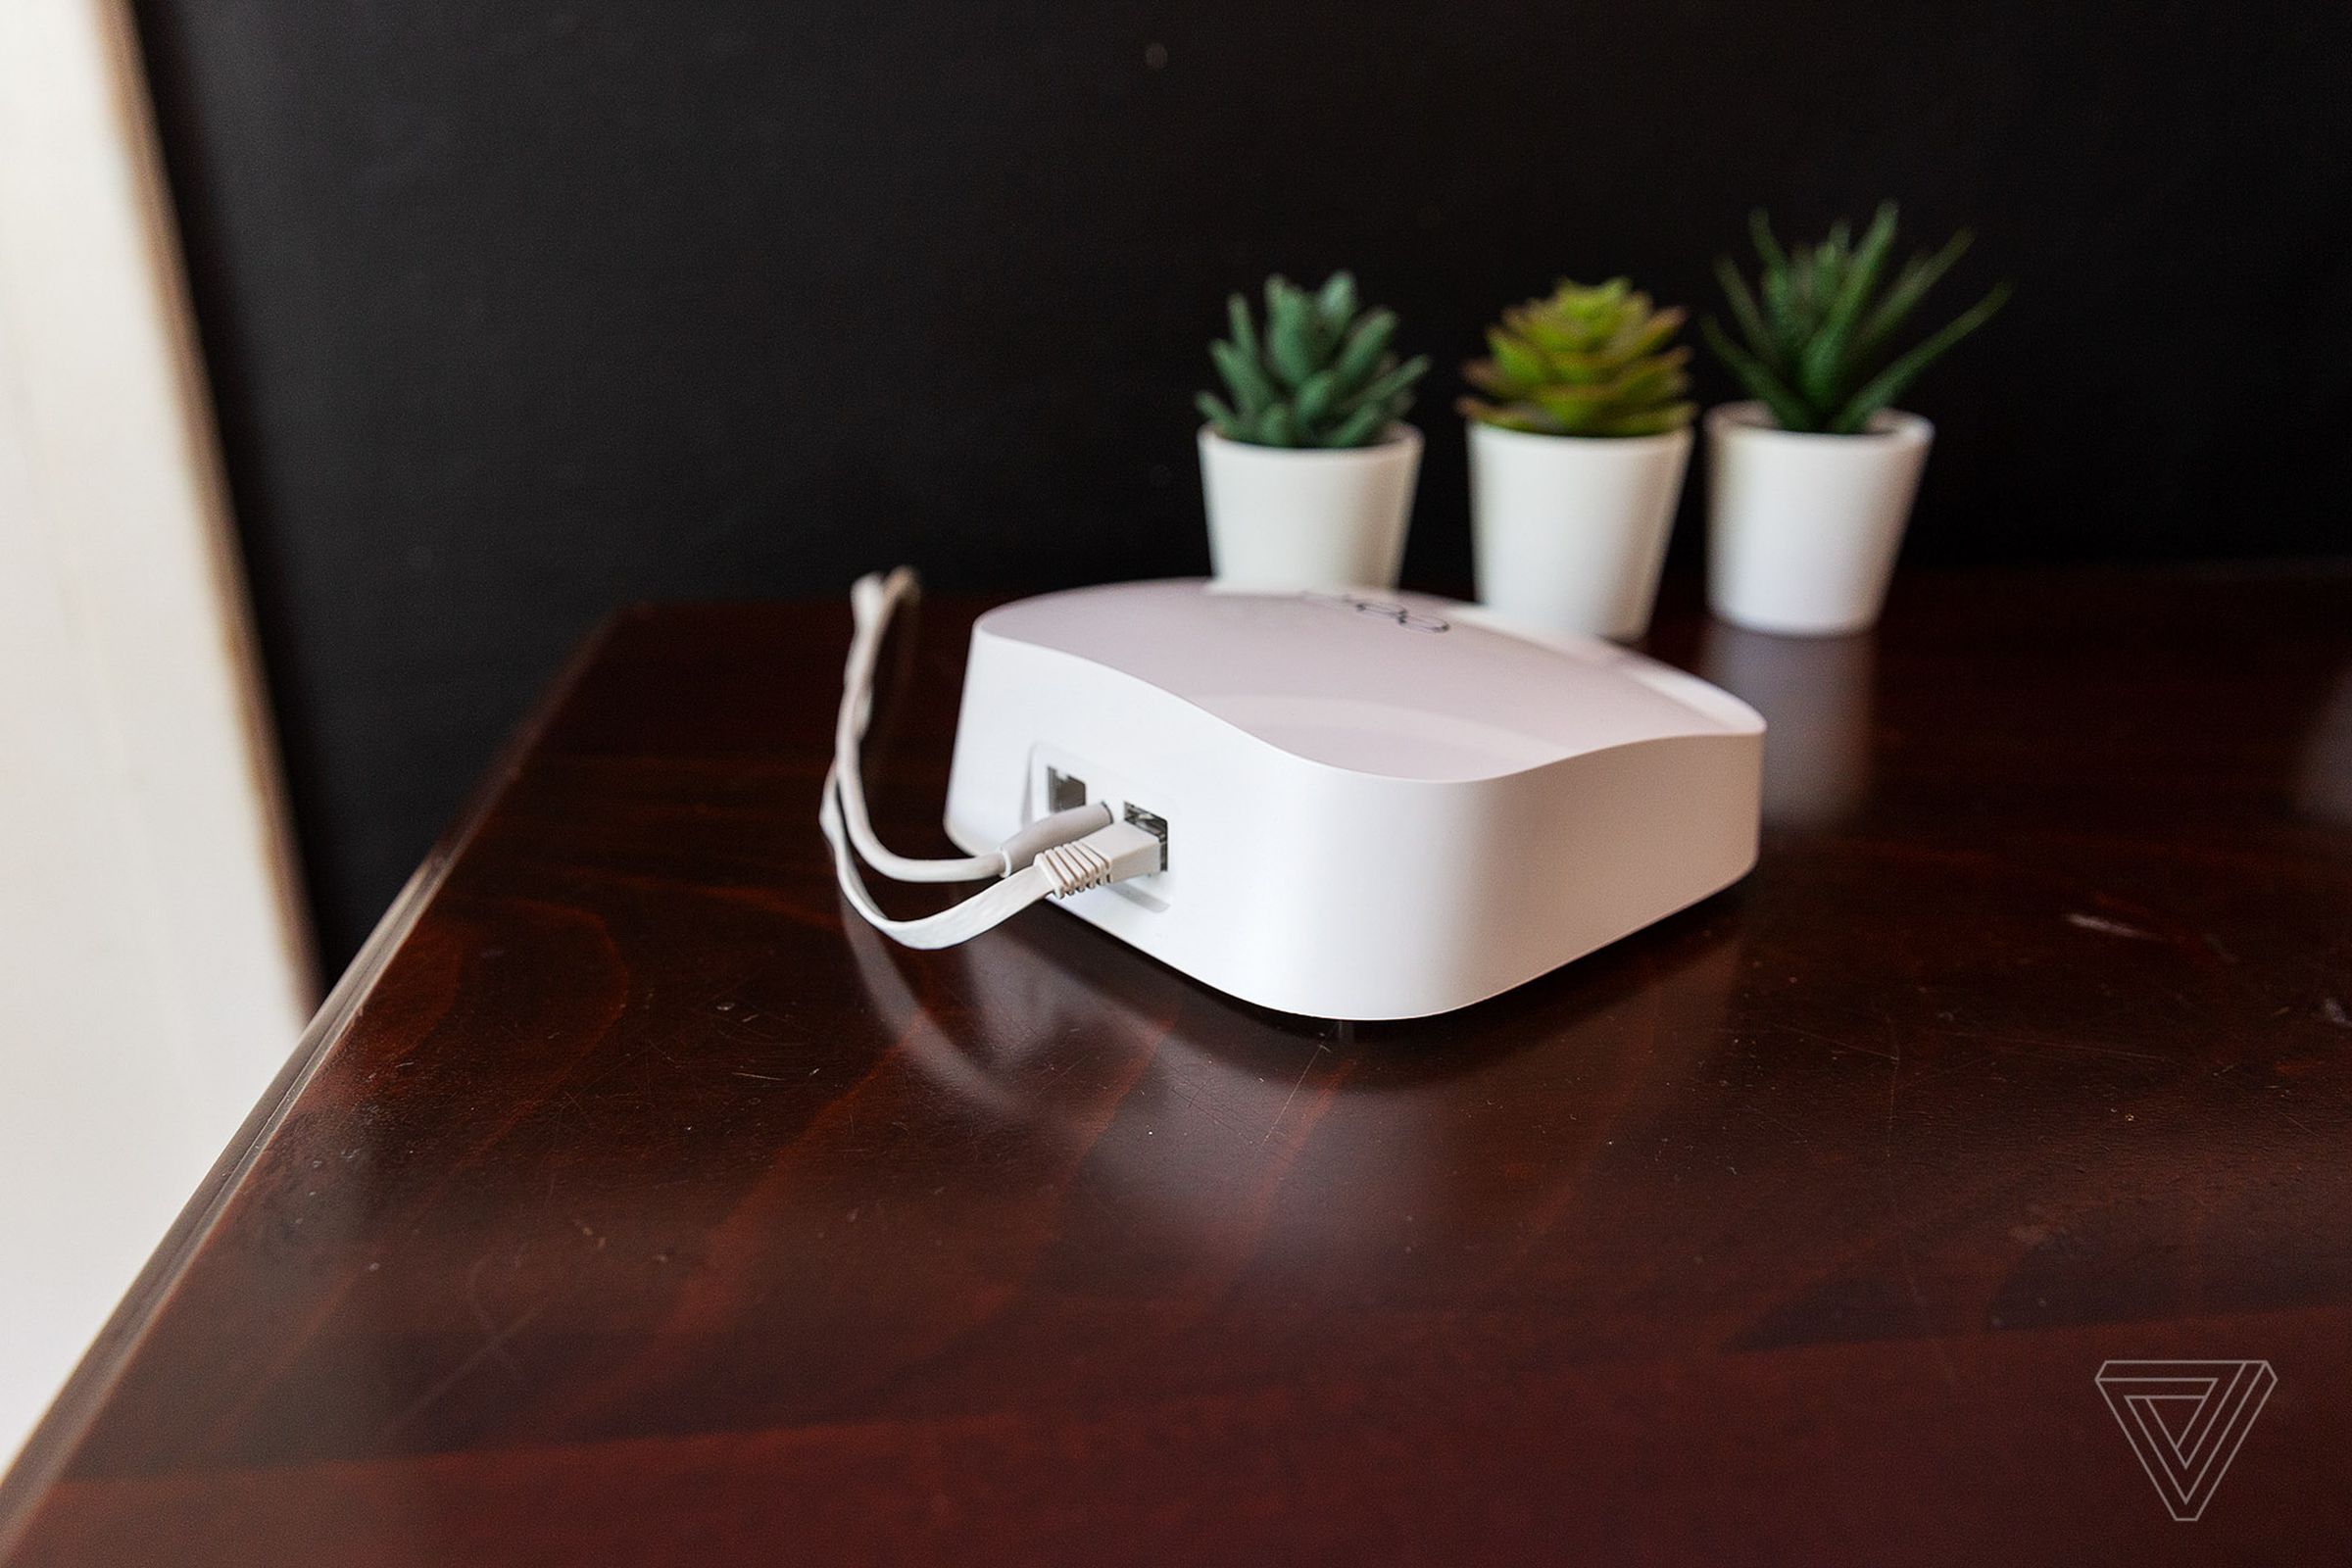 Eero’s rely on a wireless backhaul, although because there are two ports on each node you can setup a wired backhaul for faster, more consistent speeds.